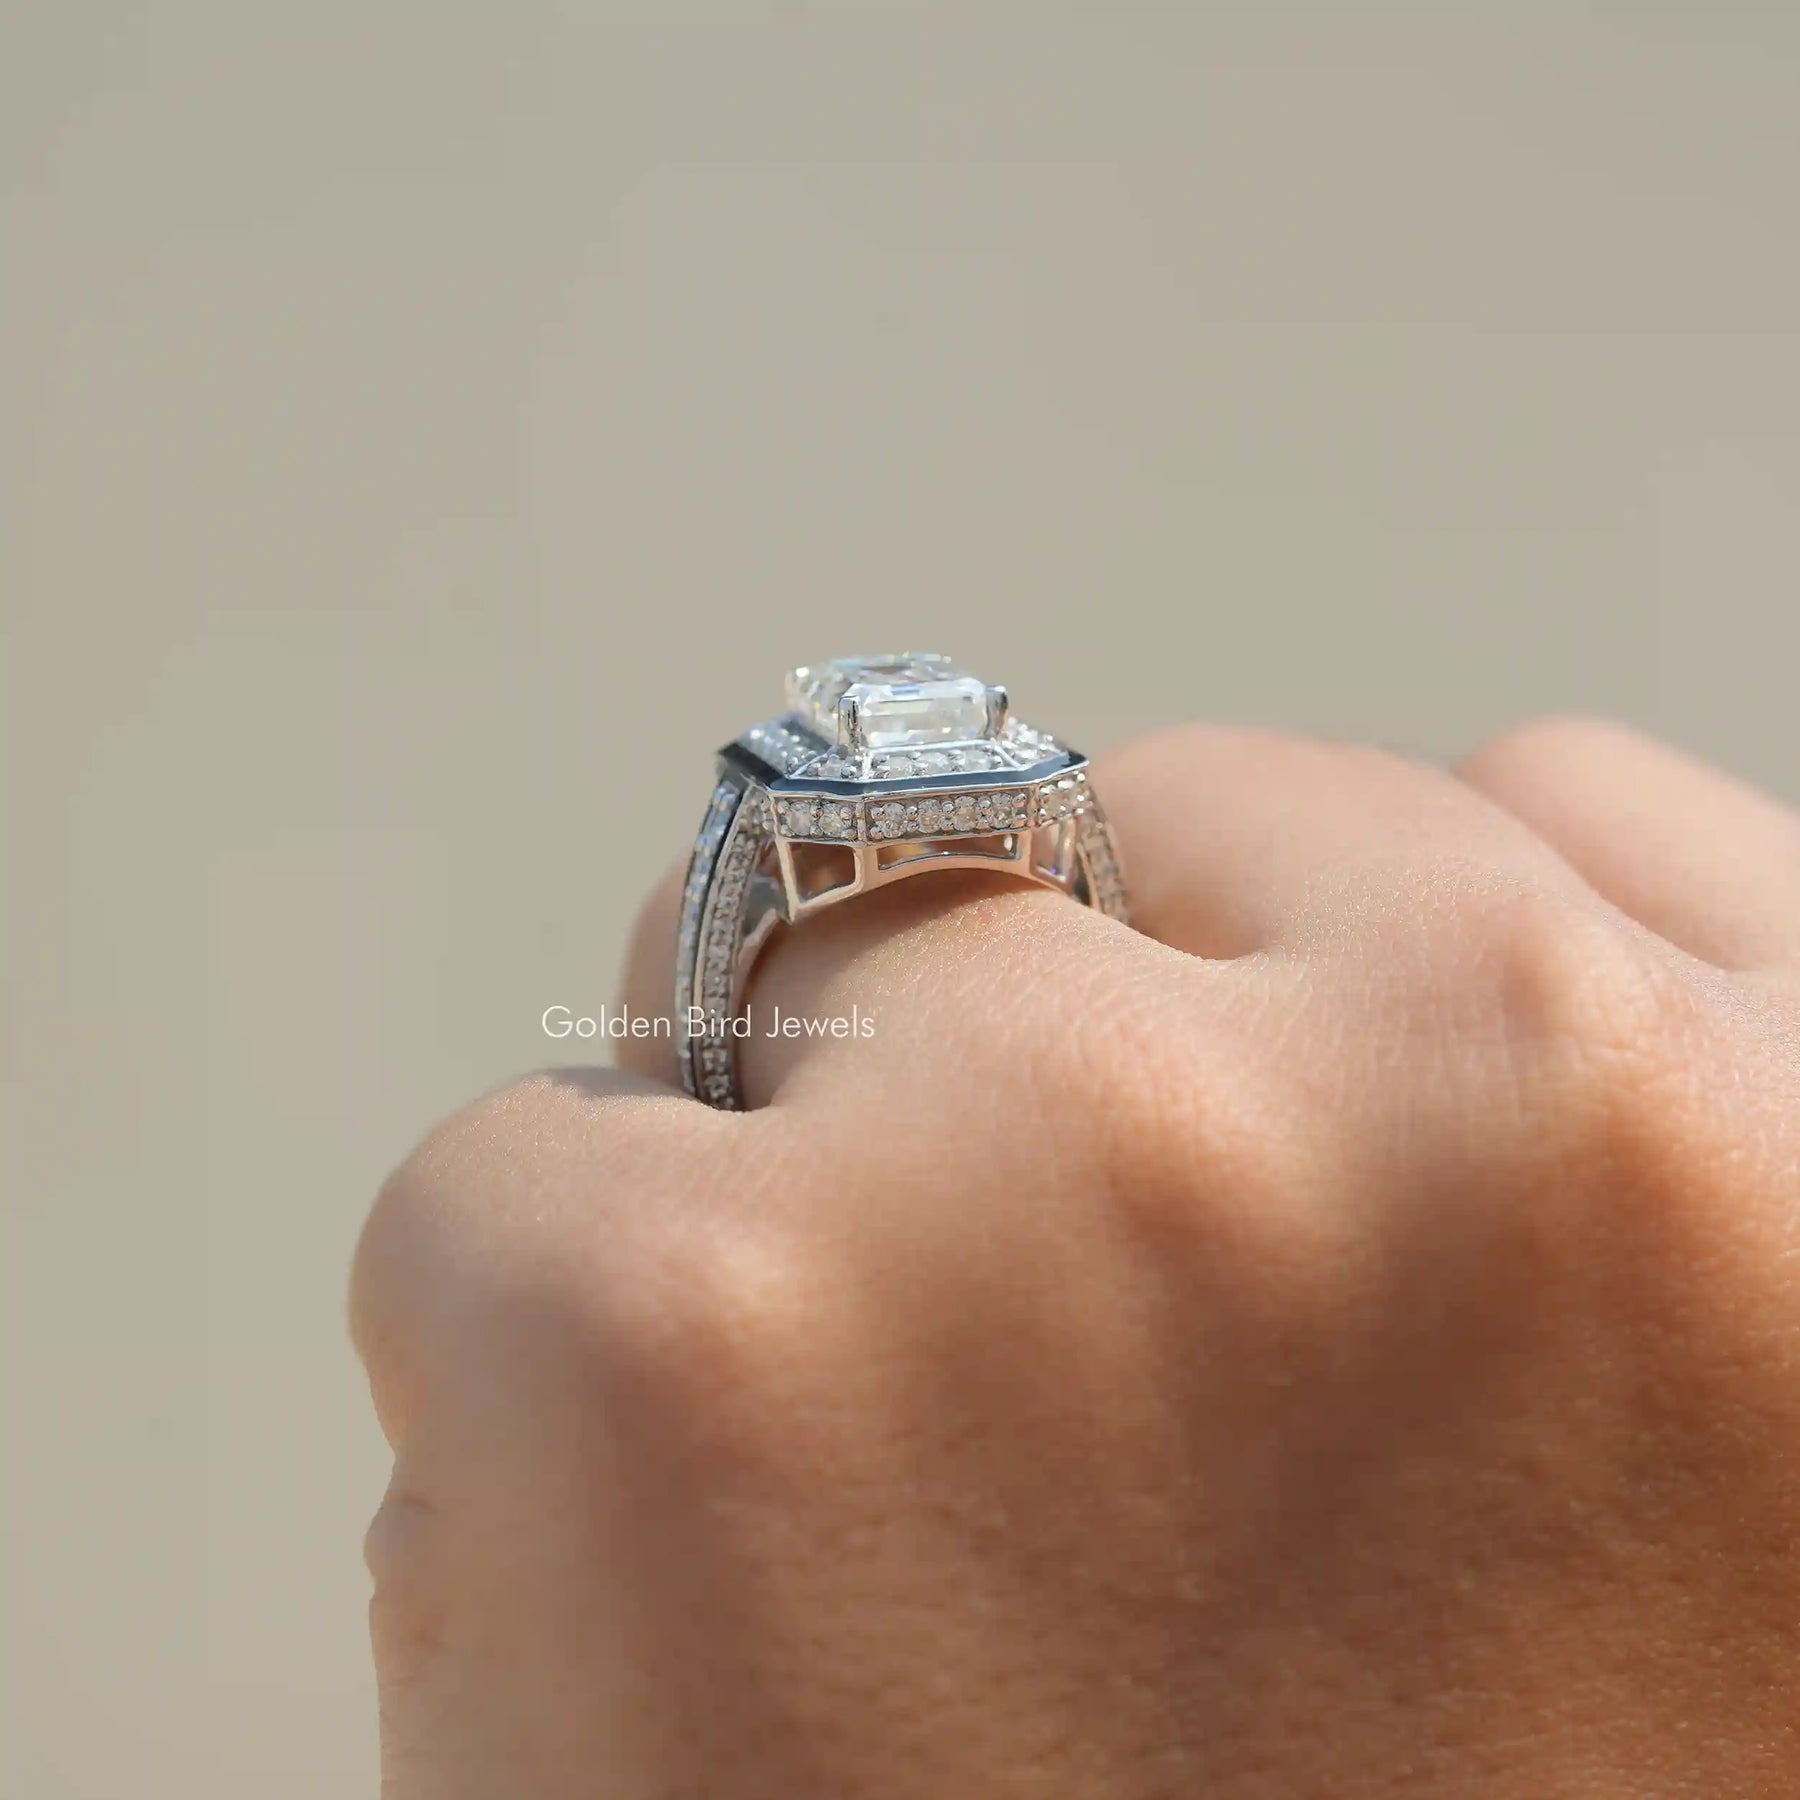 [White Gold Emerald Cut Moissanite Vintage Style Engagement Ring]-[Golden Bird Jewels]